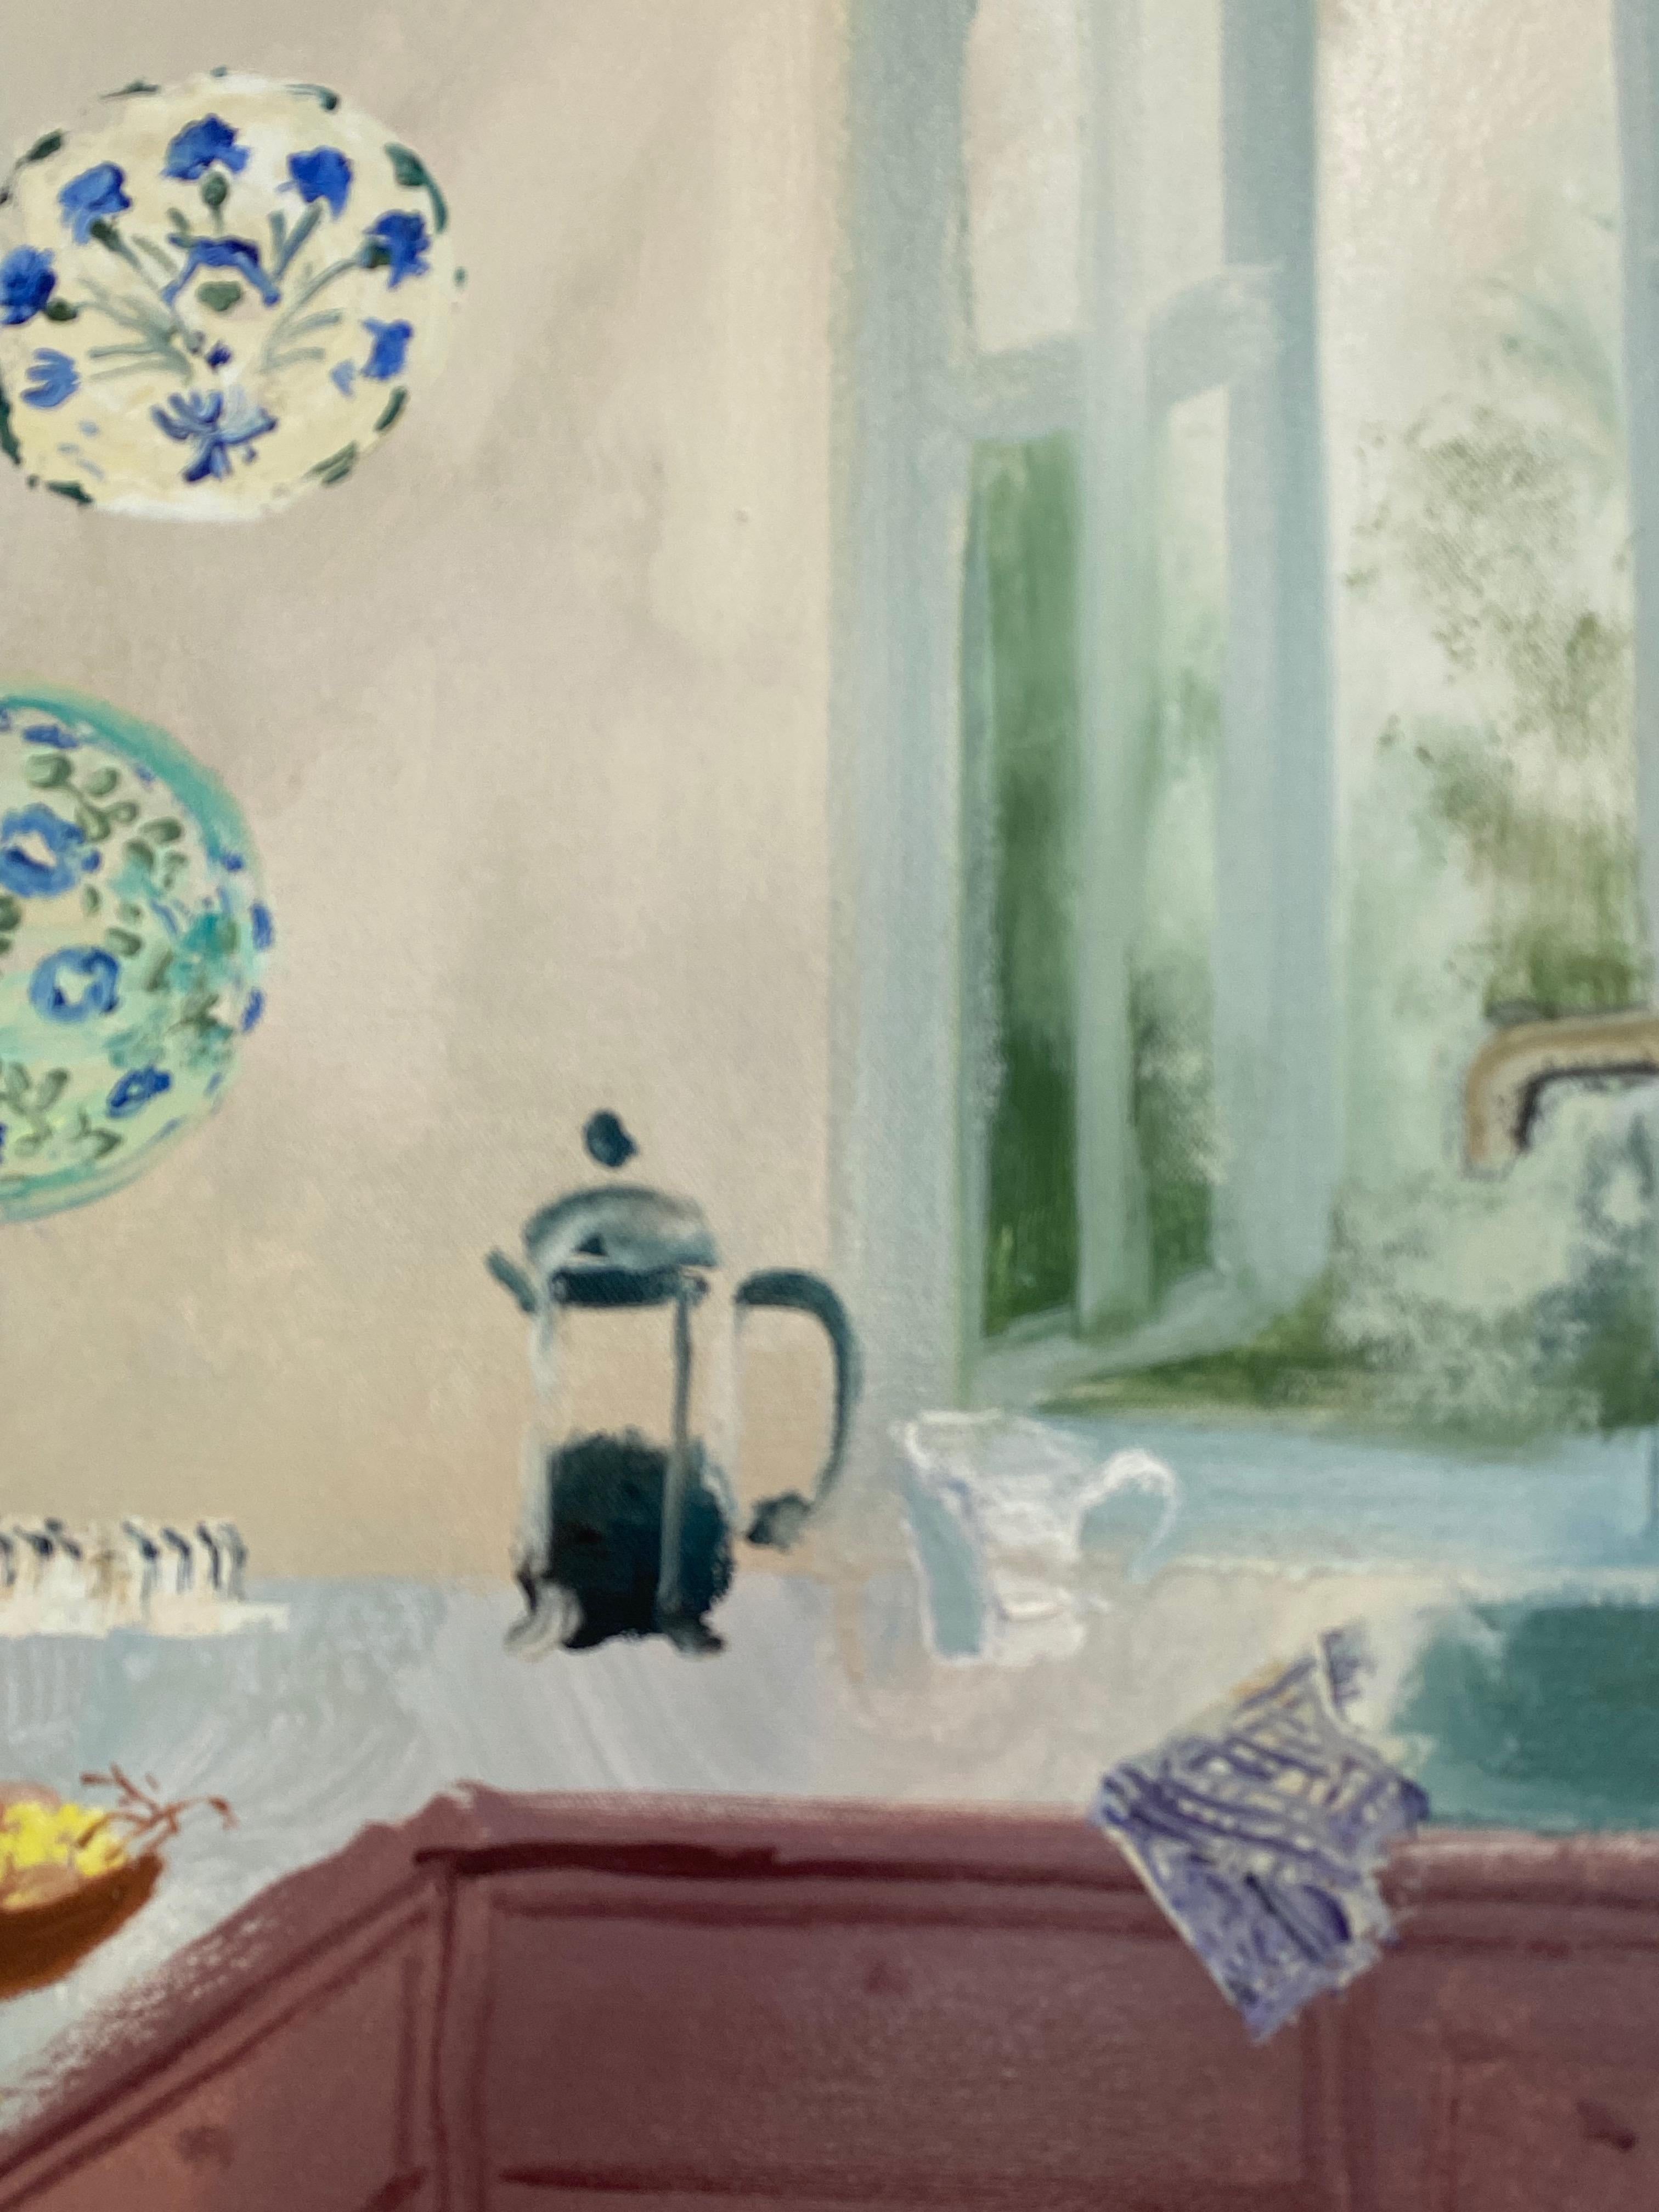 In this bright and inviting interior scene, two patterned china plates hang on a light beige wall beside an open window with a view of verdant botany and suggesting the fresh air outdoors. Signed, dated and titled on verso.

Pastoral and bucolic